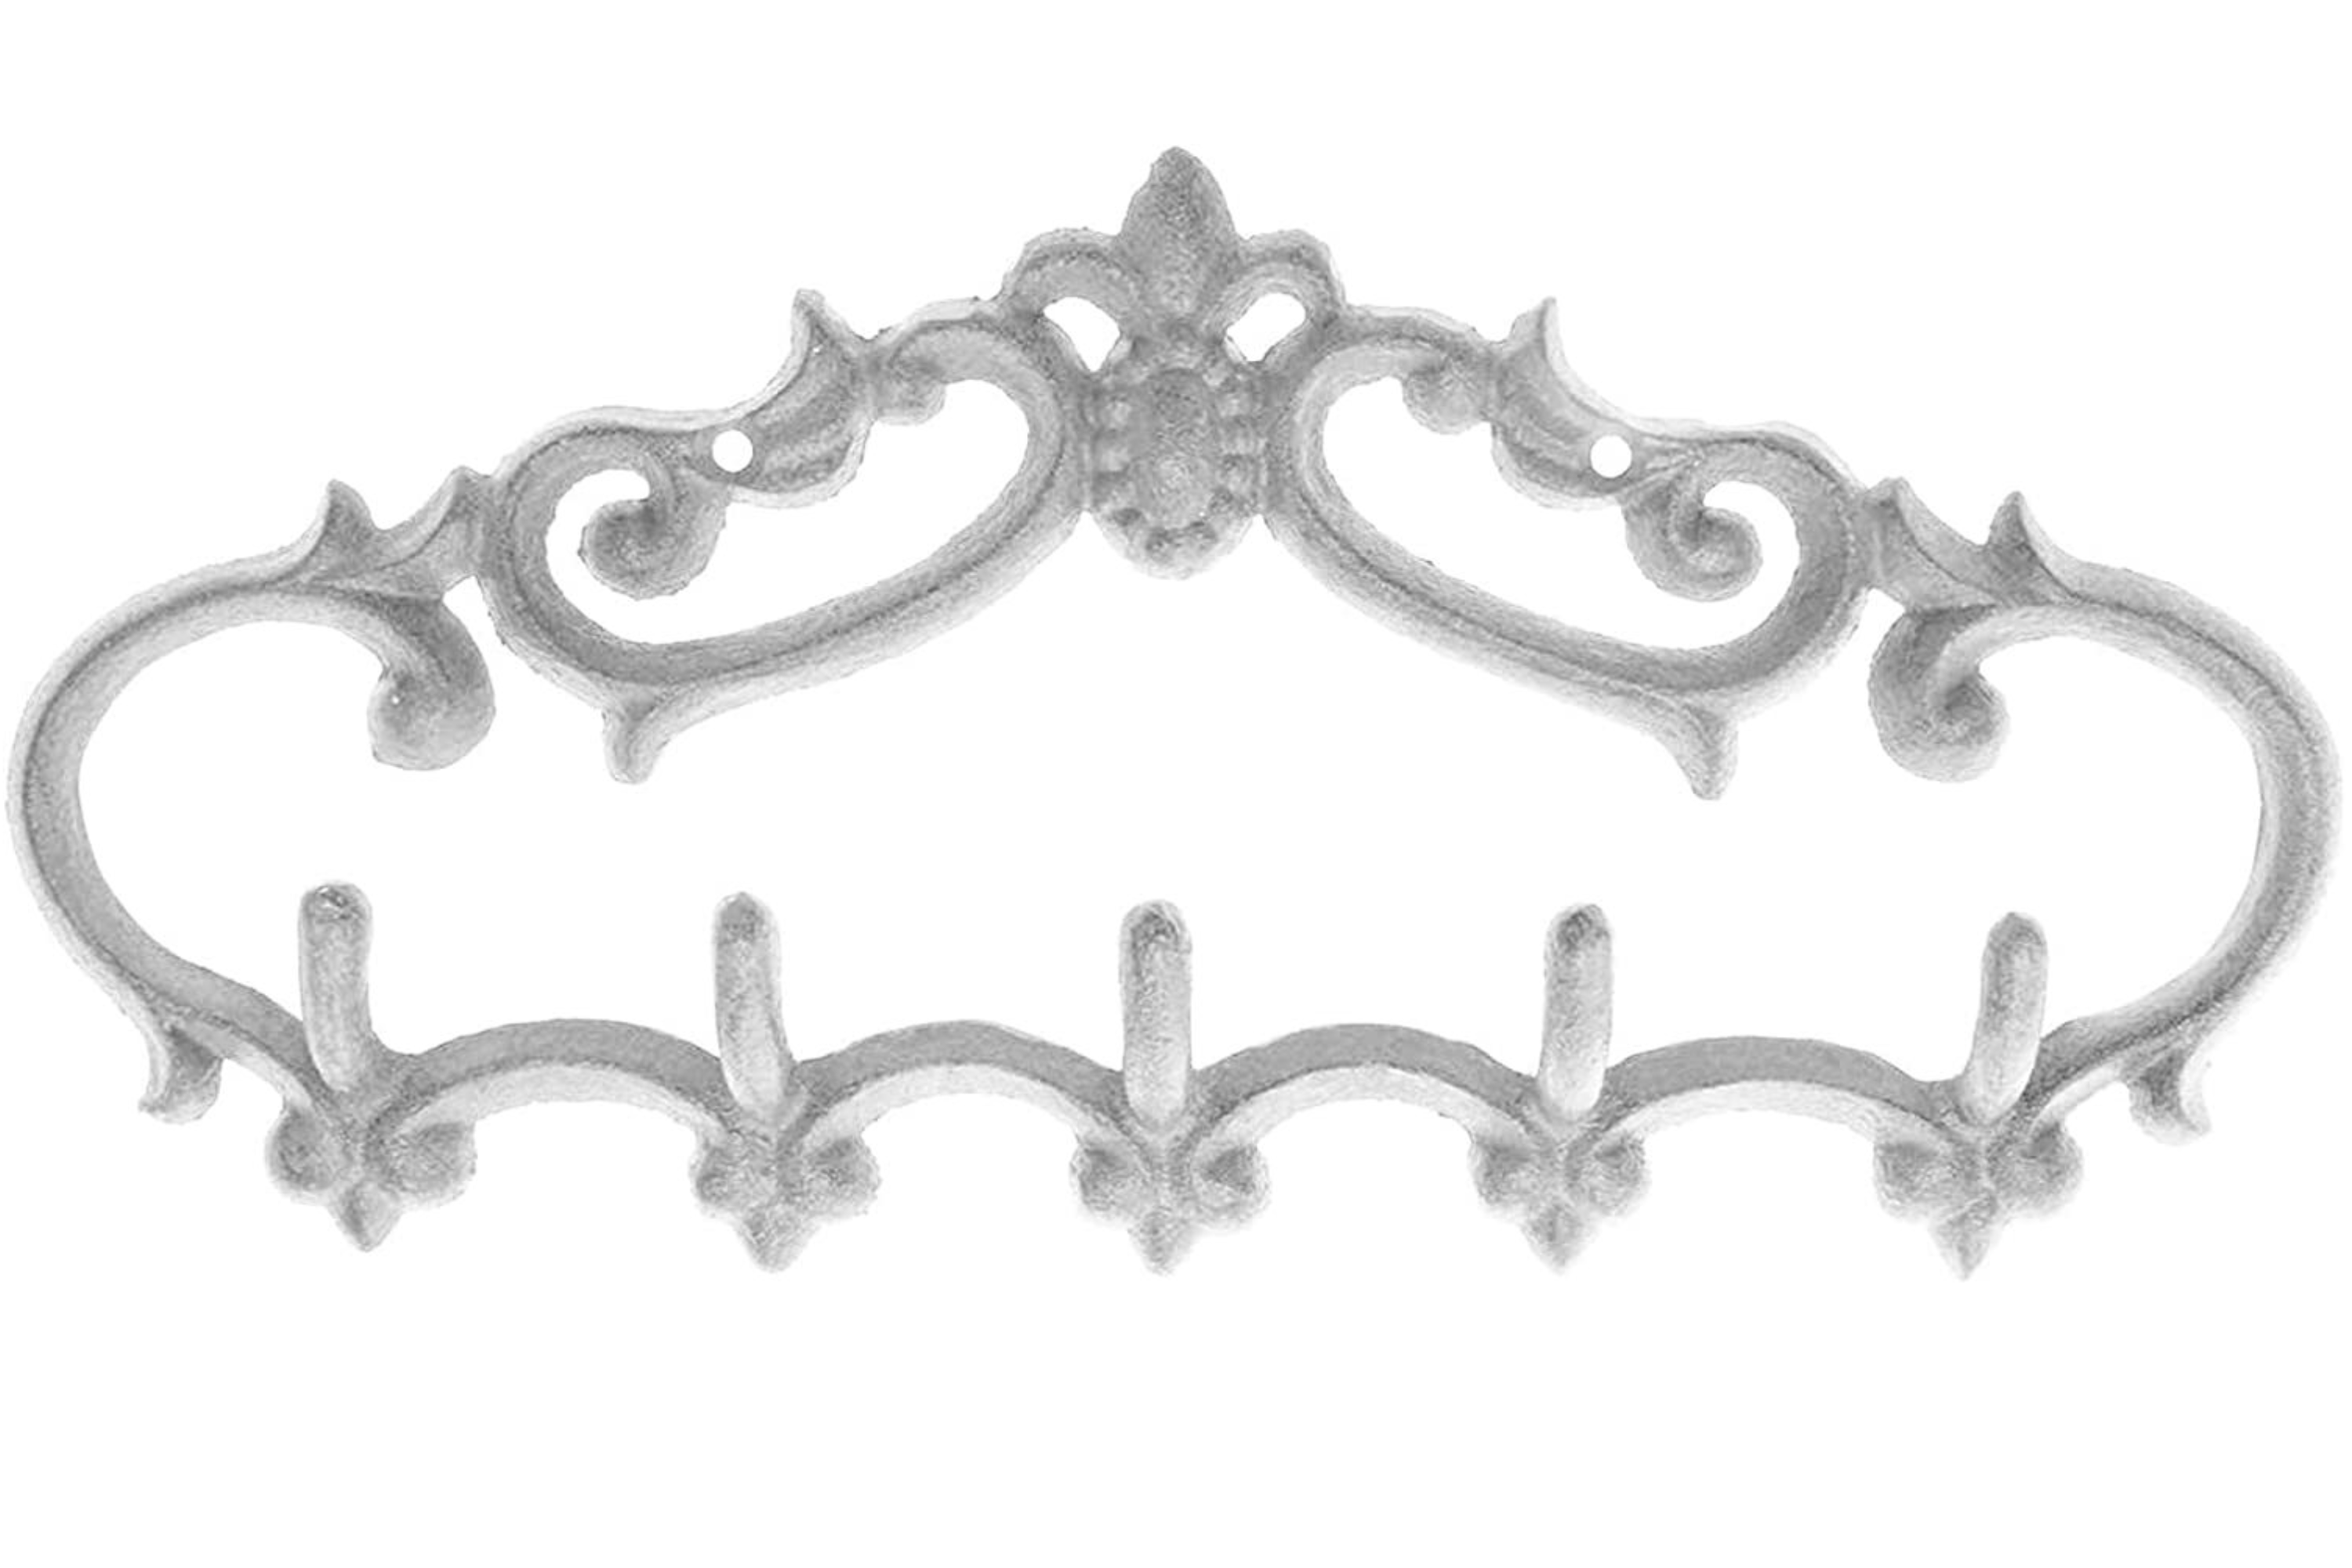 Comfify Cast Iron Vintage Double Wall Hook | Decorative Wall Mounted Coat Hanger | with Screws and Anchors - Set of 2